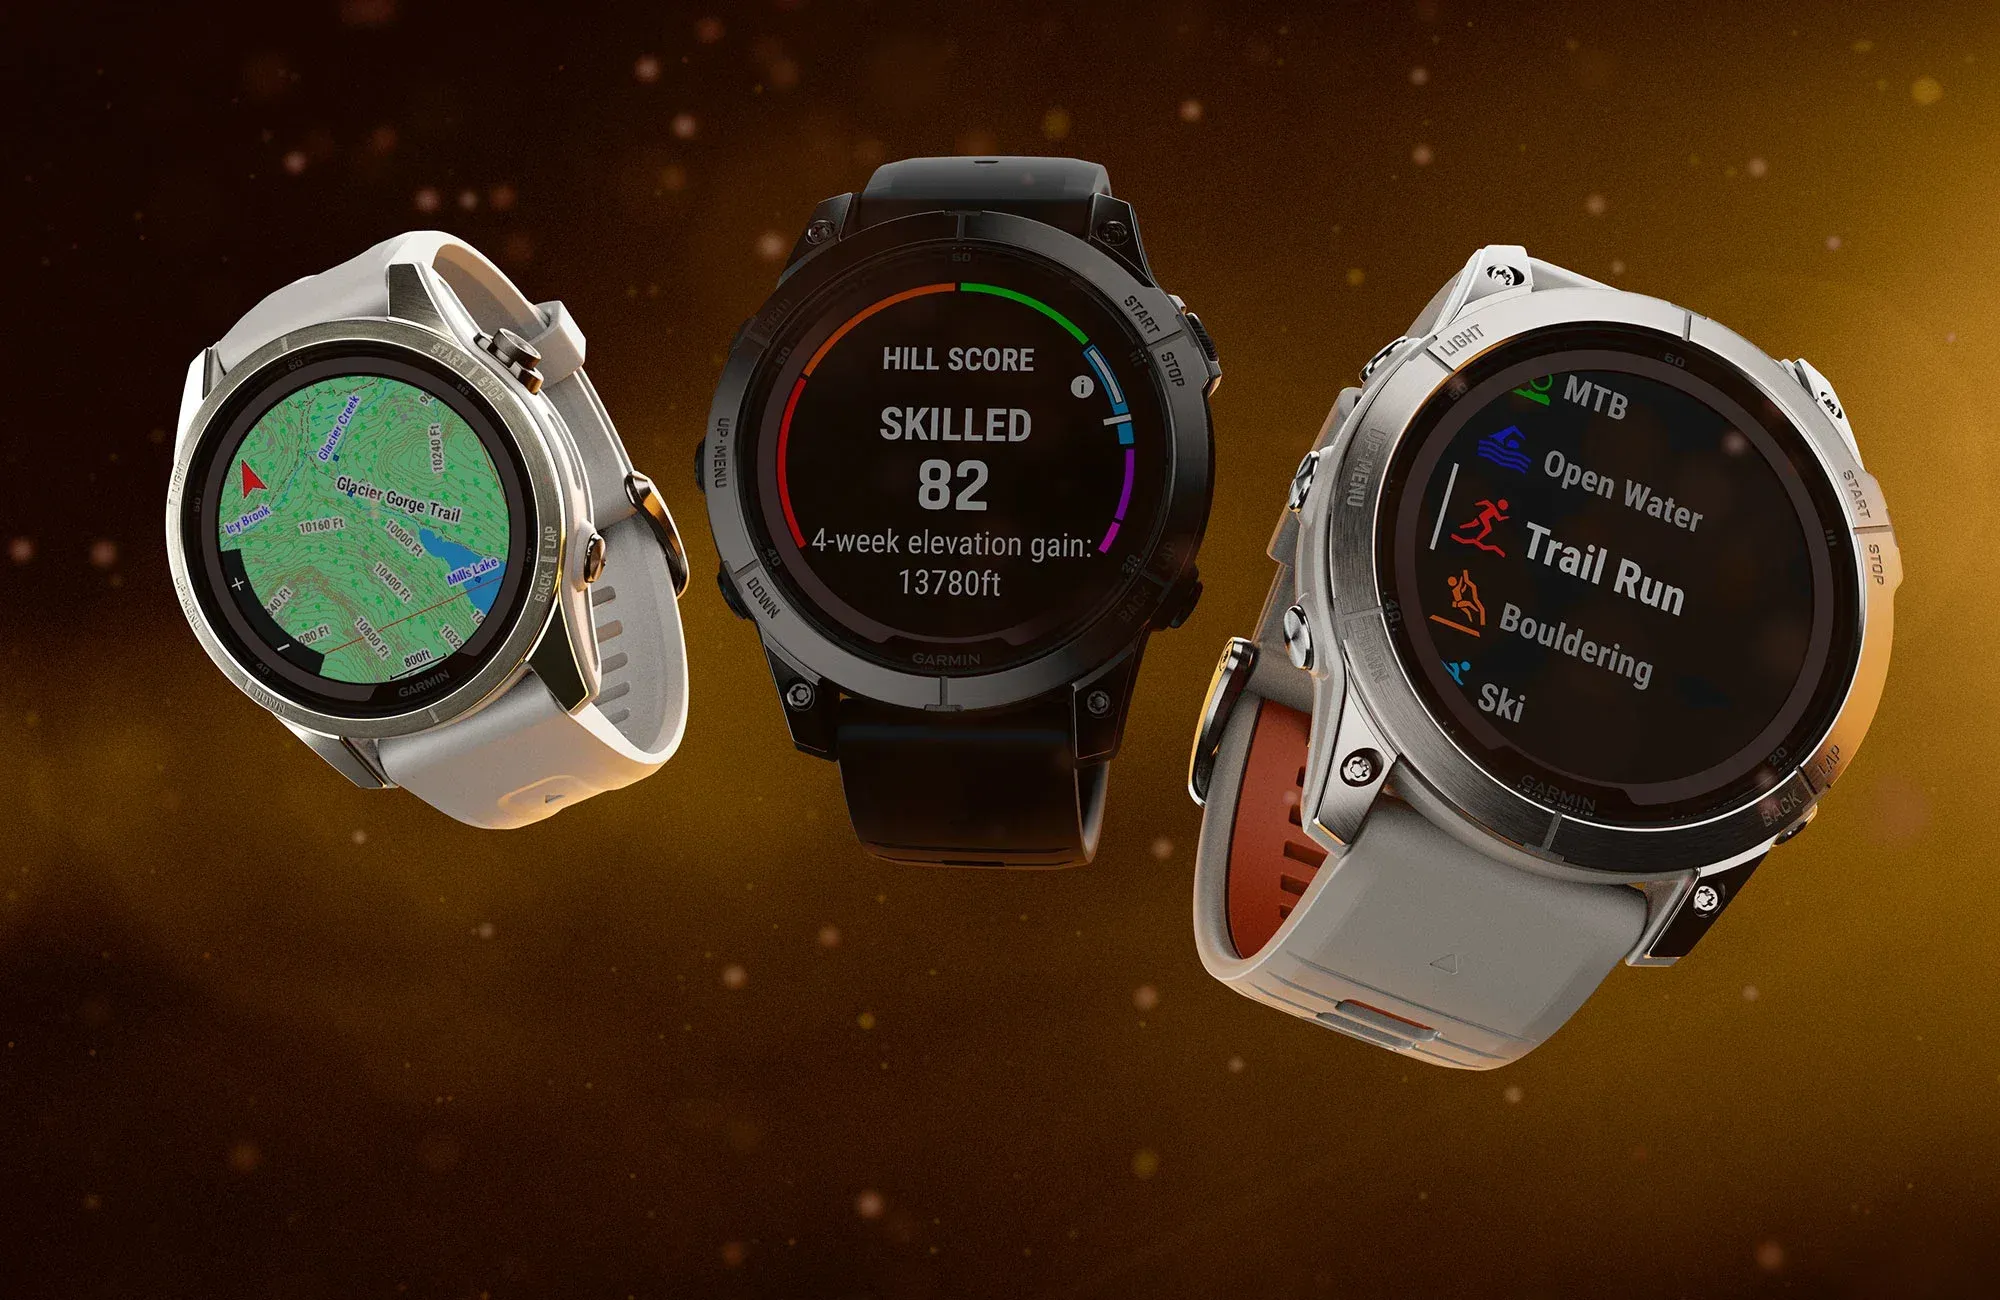 18 Sports Mode SmartWatch with 24/7 HR Recording